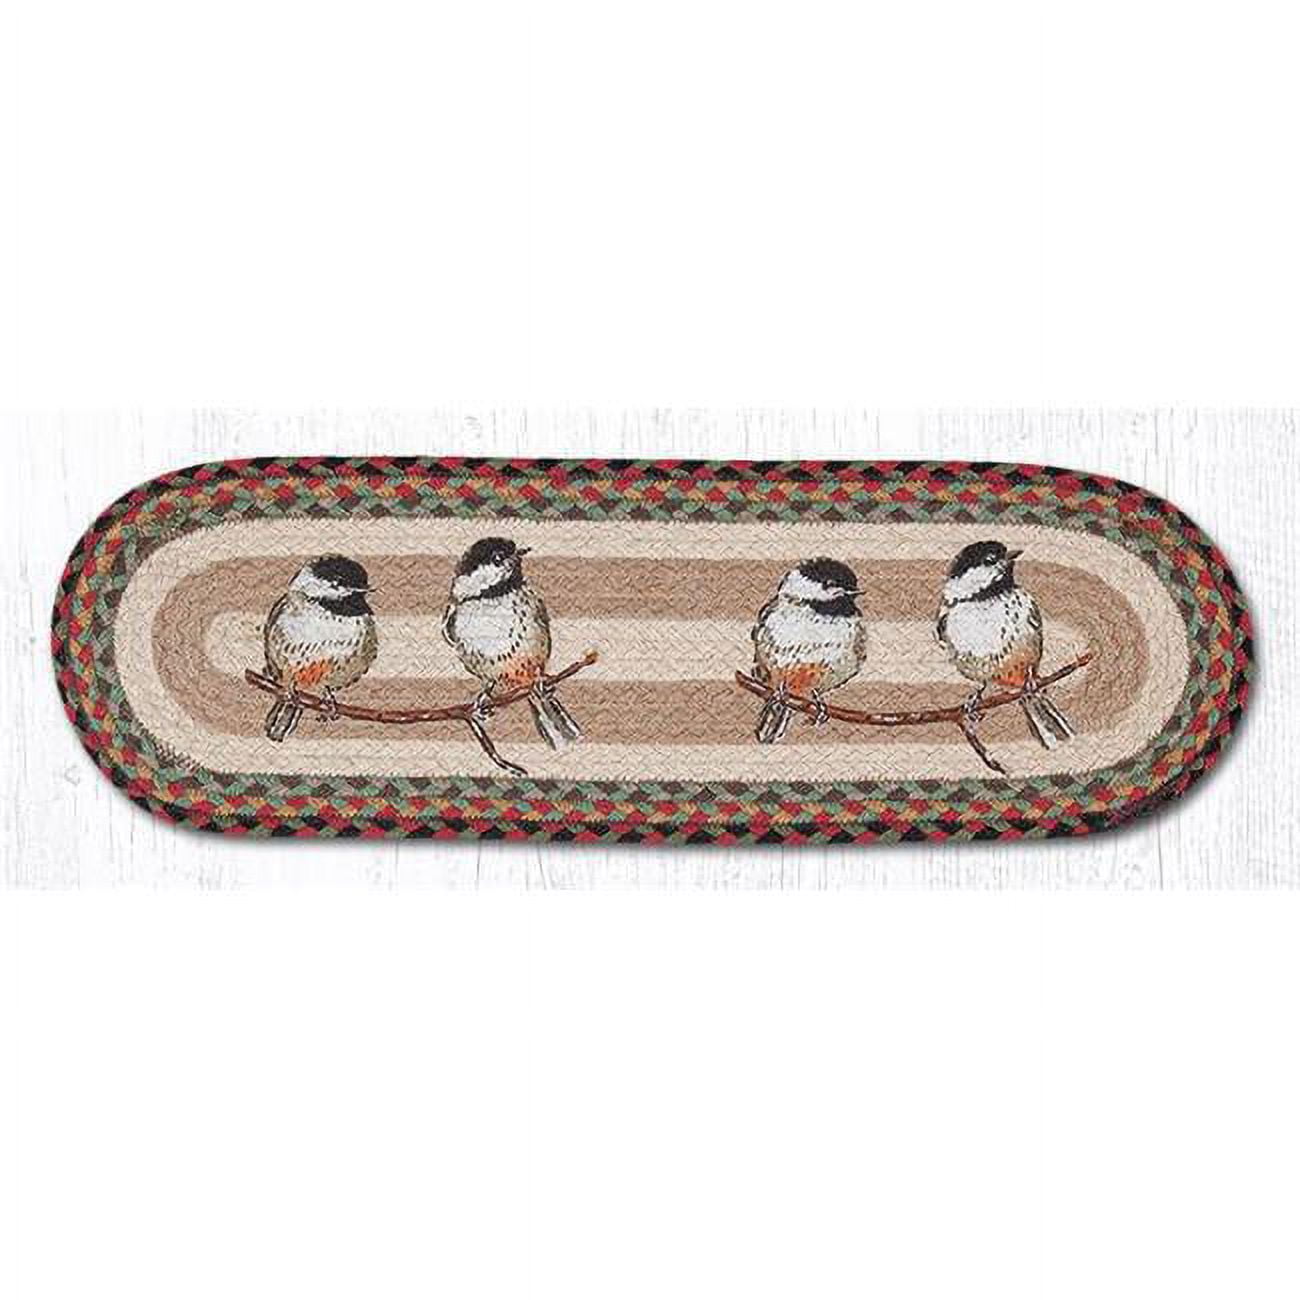 Capitol Importing 49-st081c 27 X 8.25 In. Chickadee Printed Oval Stair Tread Rug